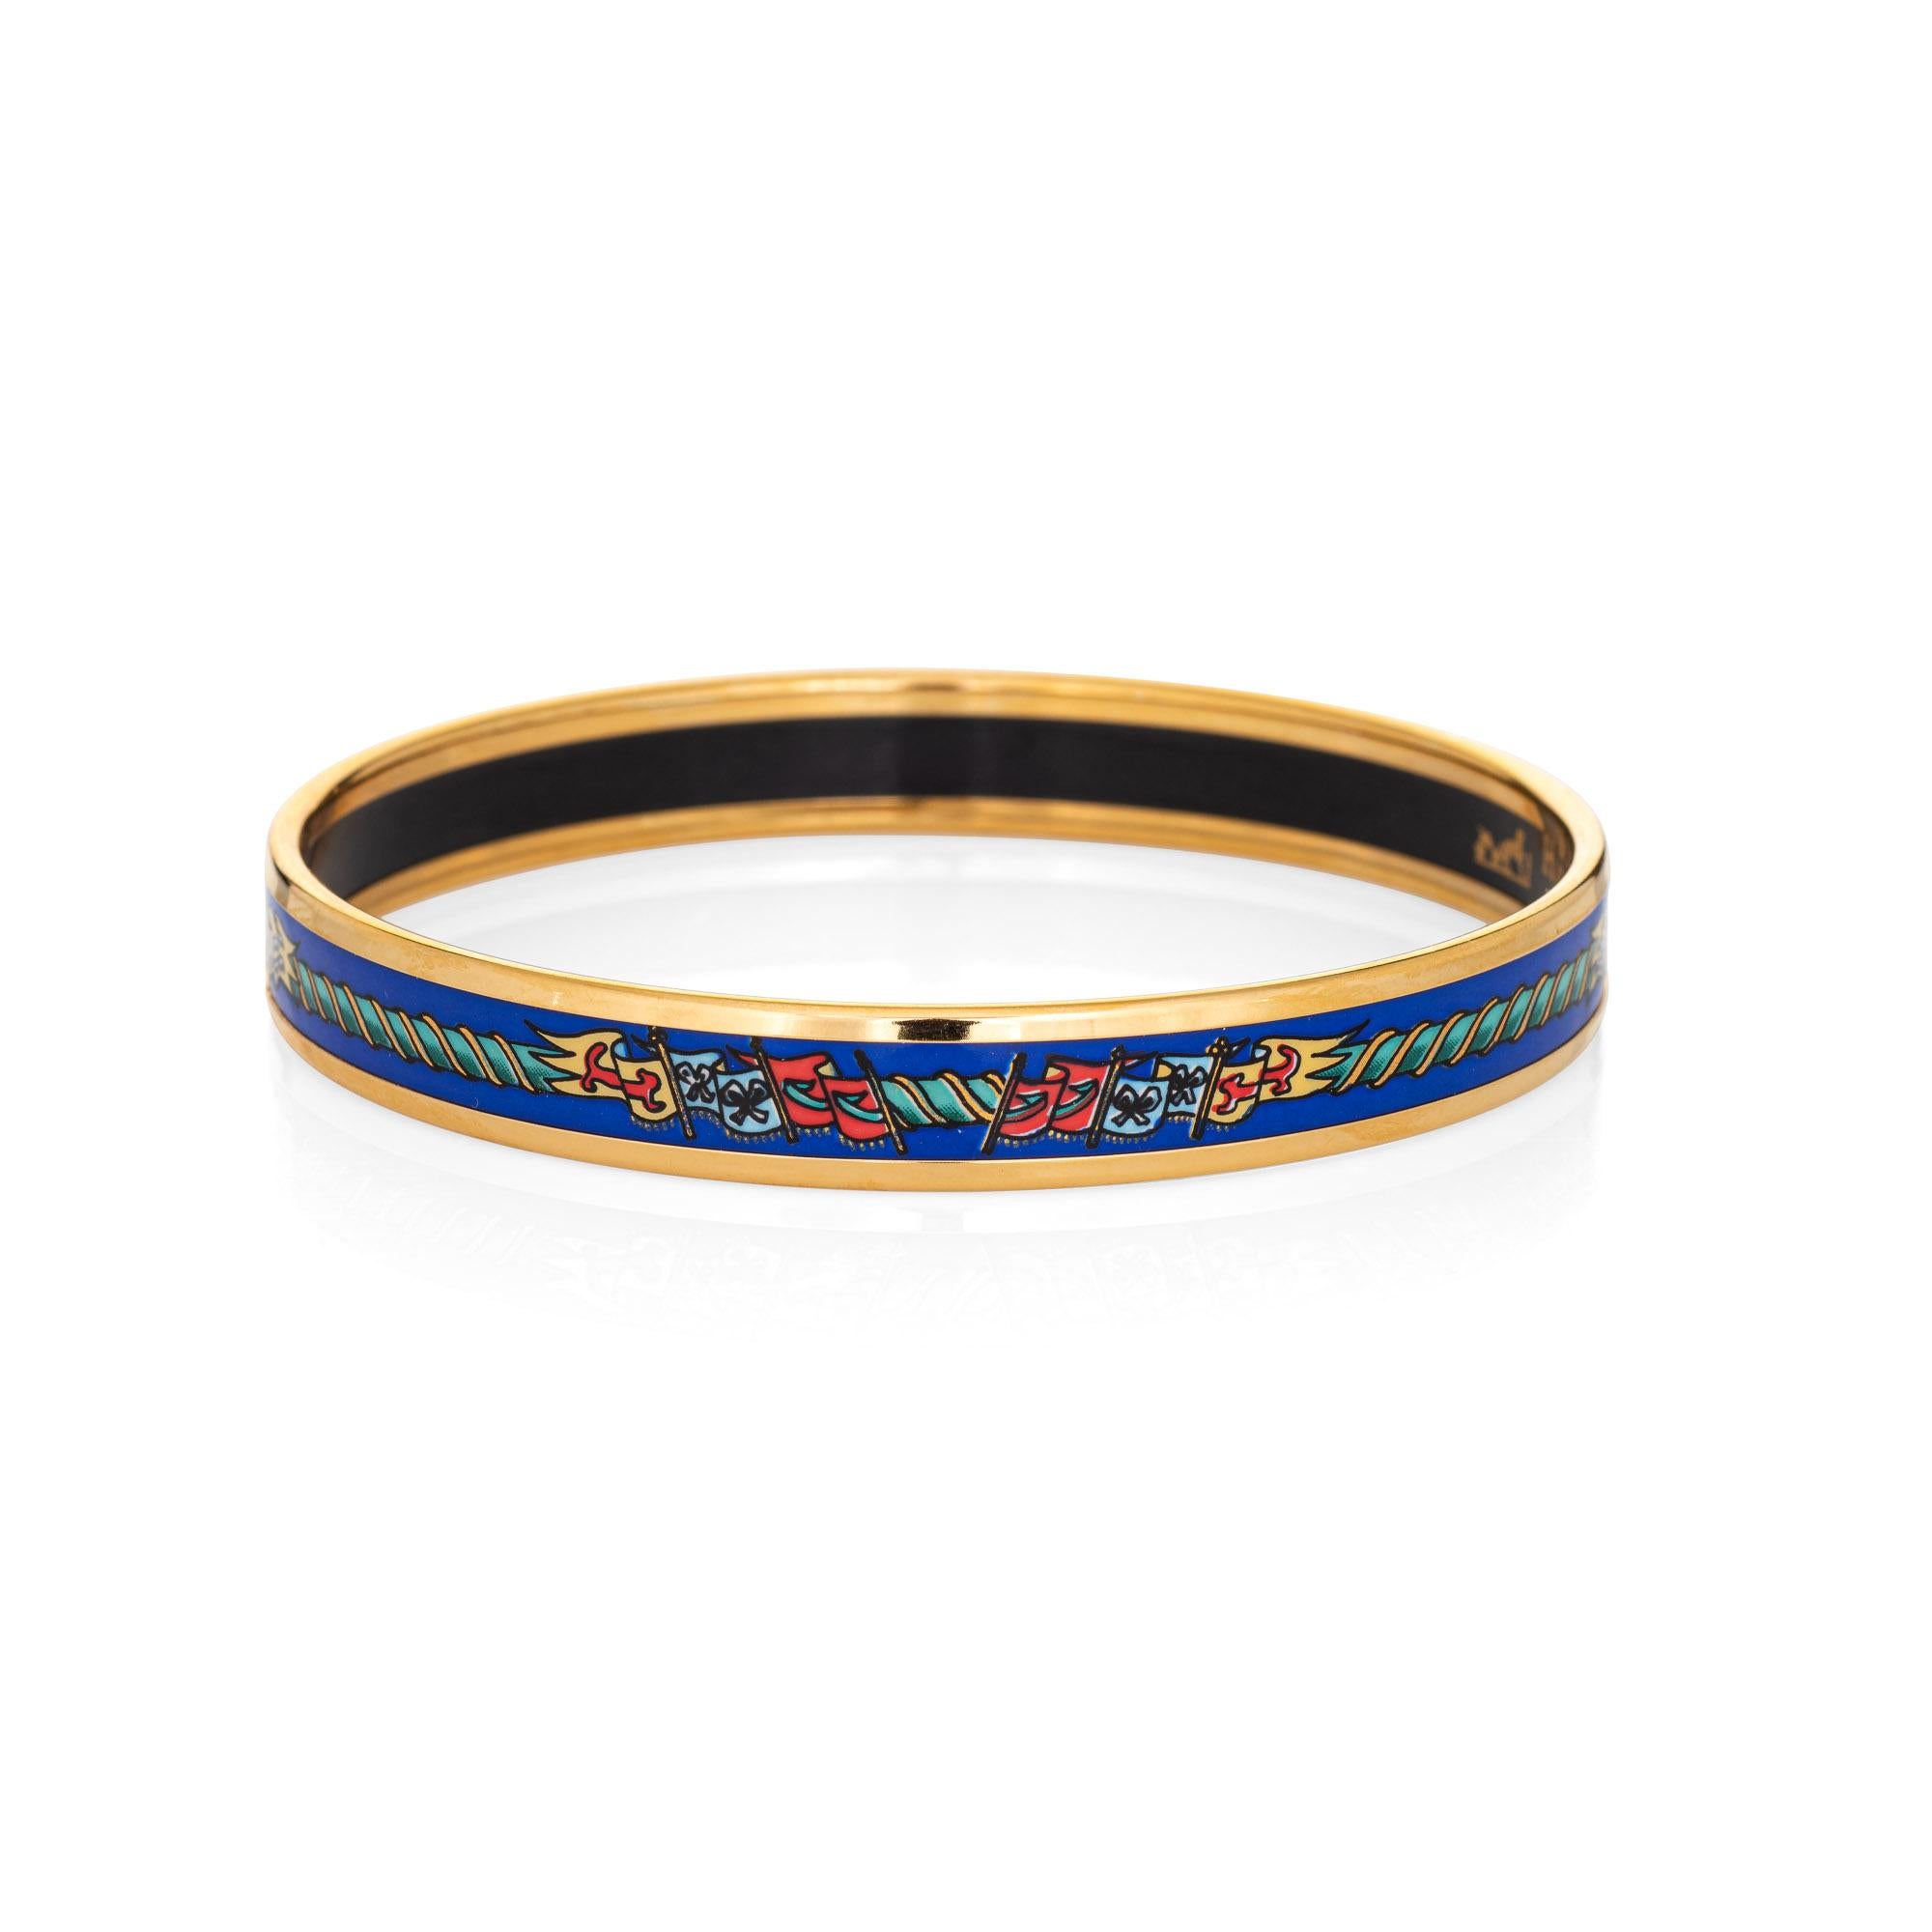 Overview:

Pre-owned vintage Hermes enamel bracelet with a pattern of colorful flags set upon a royal blue background, with yellow gold plated hardware.

The narrow 0.39